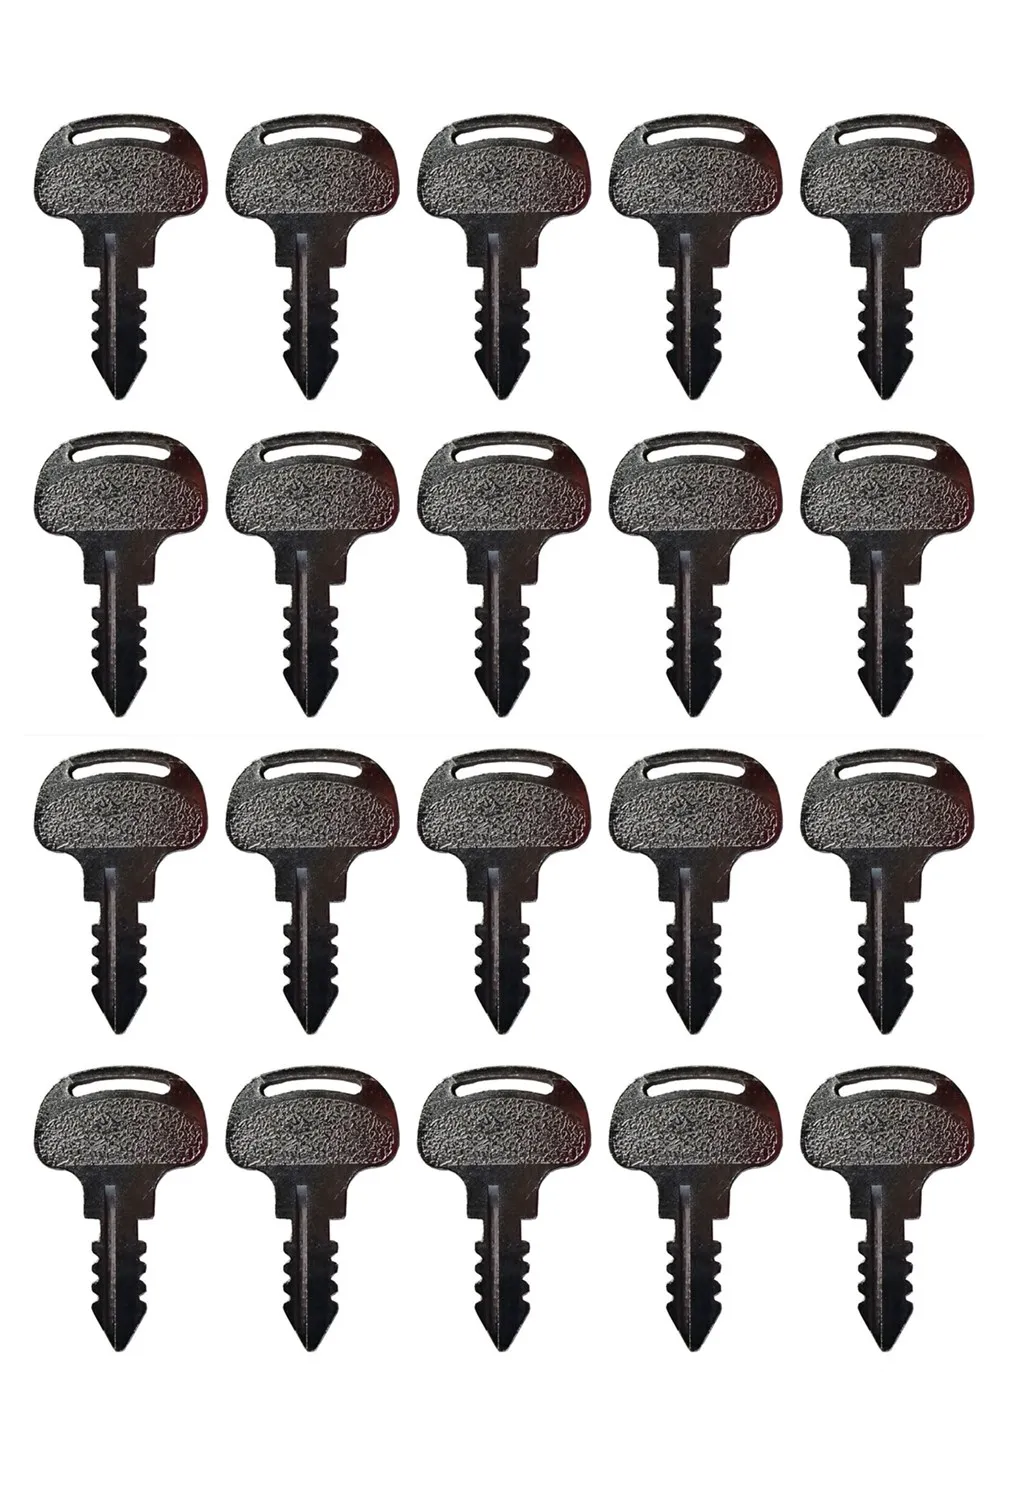 20pc Ignition Key 18510-63720 18510-63620 for Kubota Tractor M Series